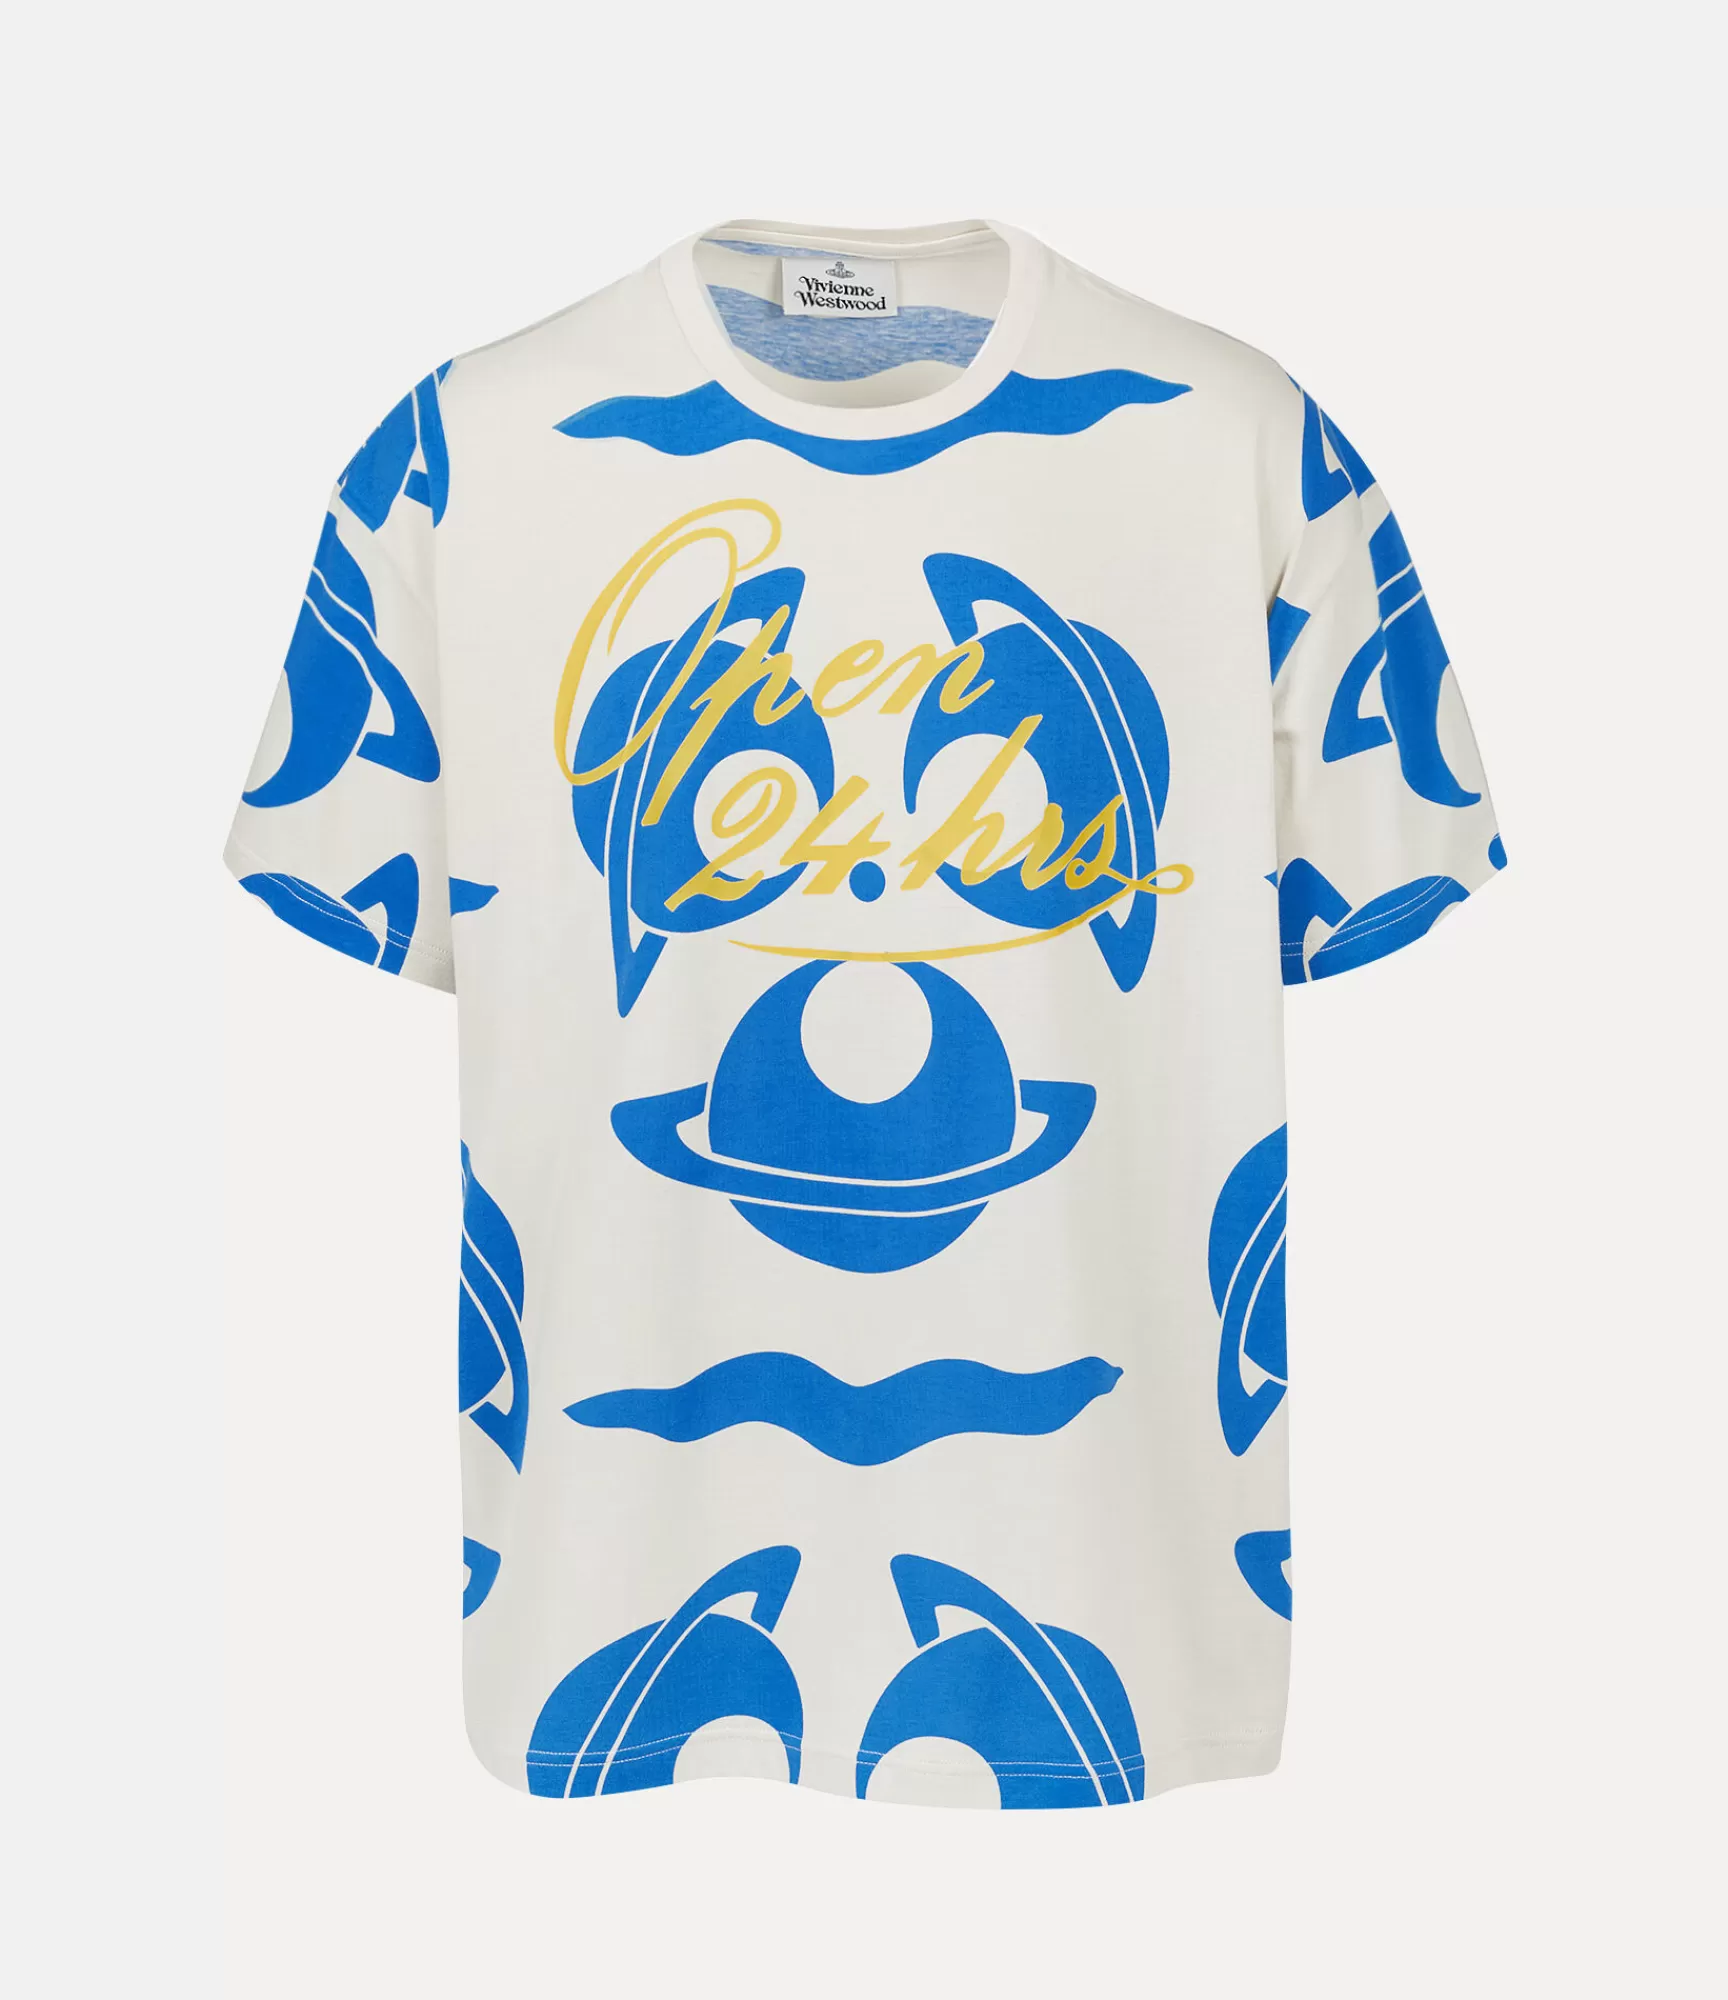 Vivienne Westwood T-Shirts and Polos | Sweatshirts and T-Shirts*OPEN24H OVERSIZED T-SHIRT Stone